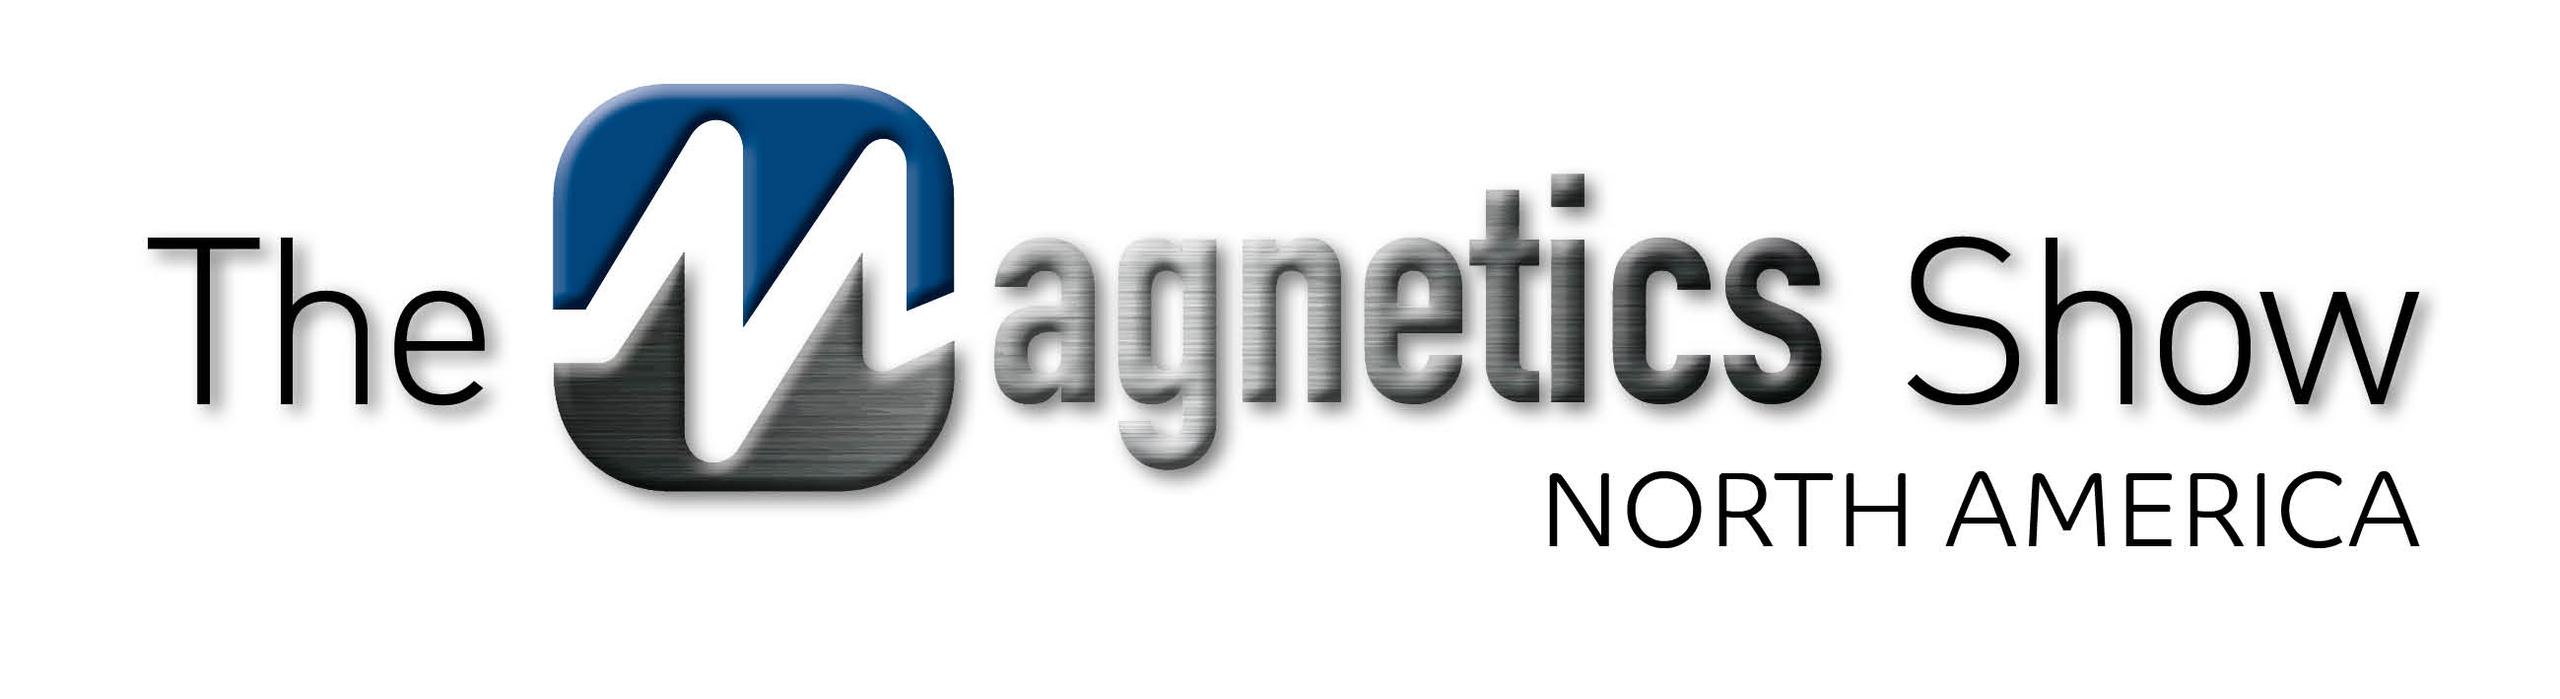 The Magnetics Show  One Linejpg